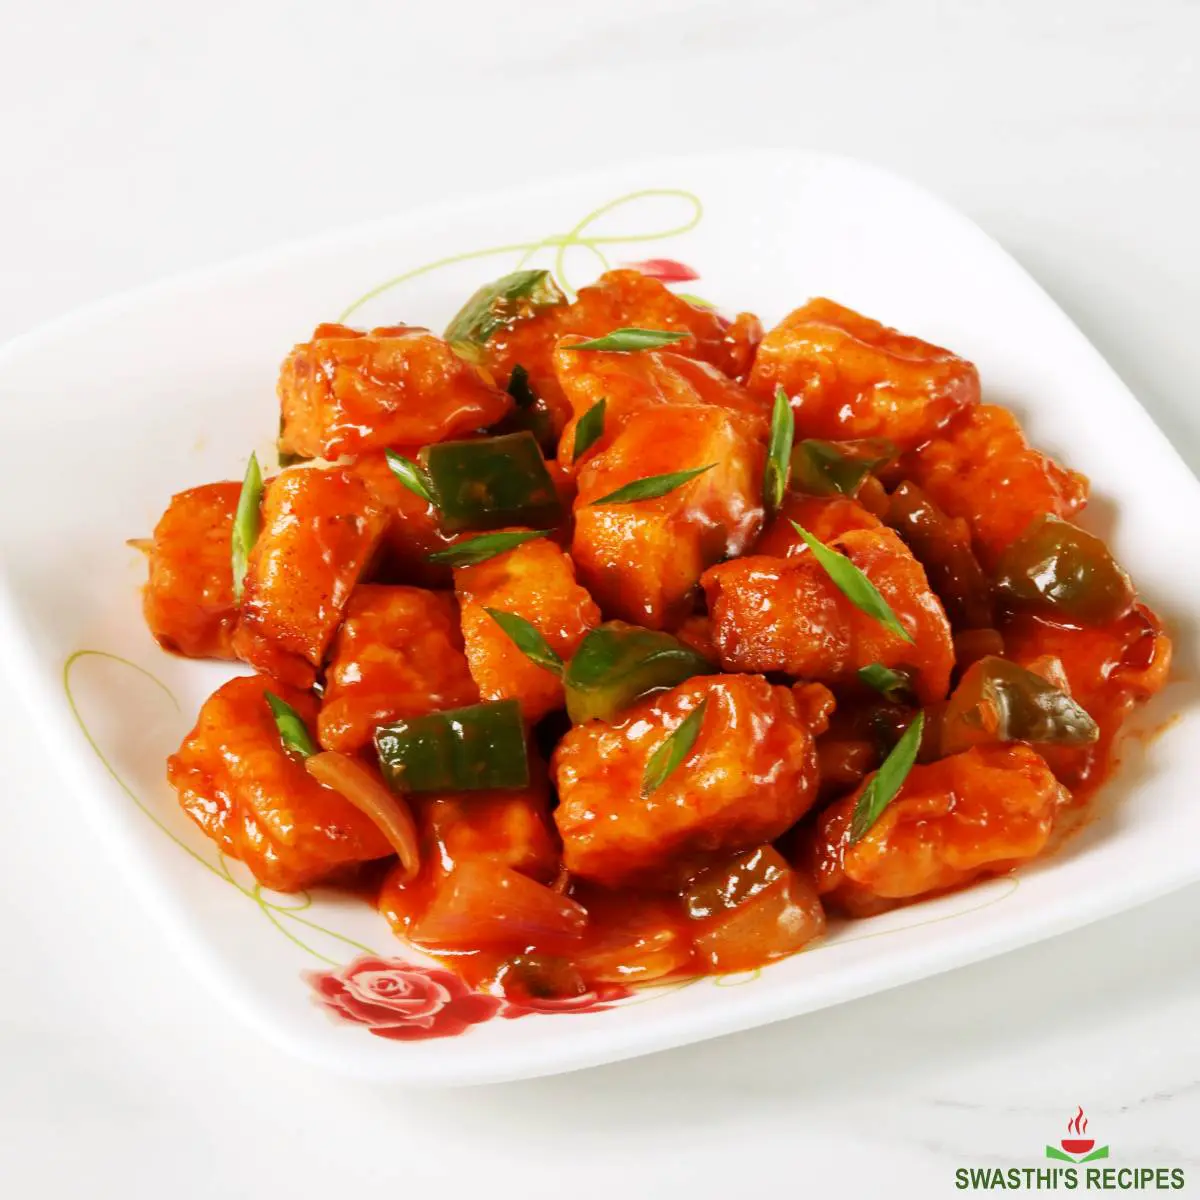 Chilli paneer served in white plate